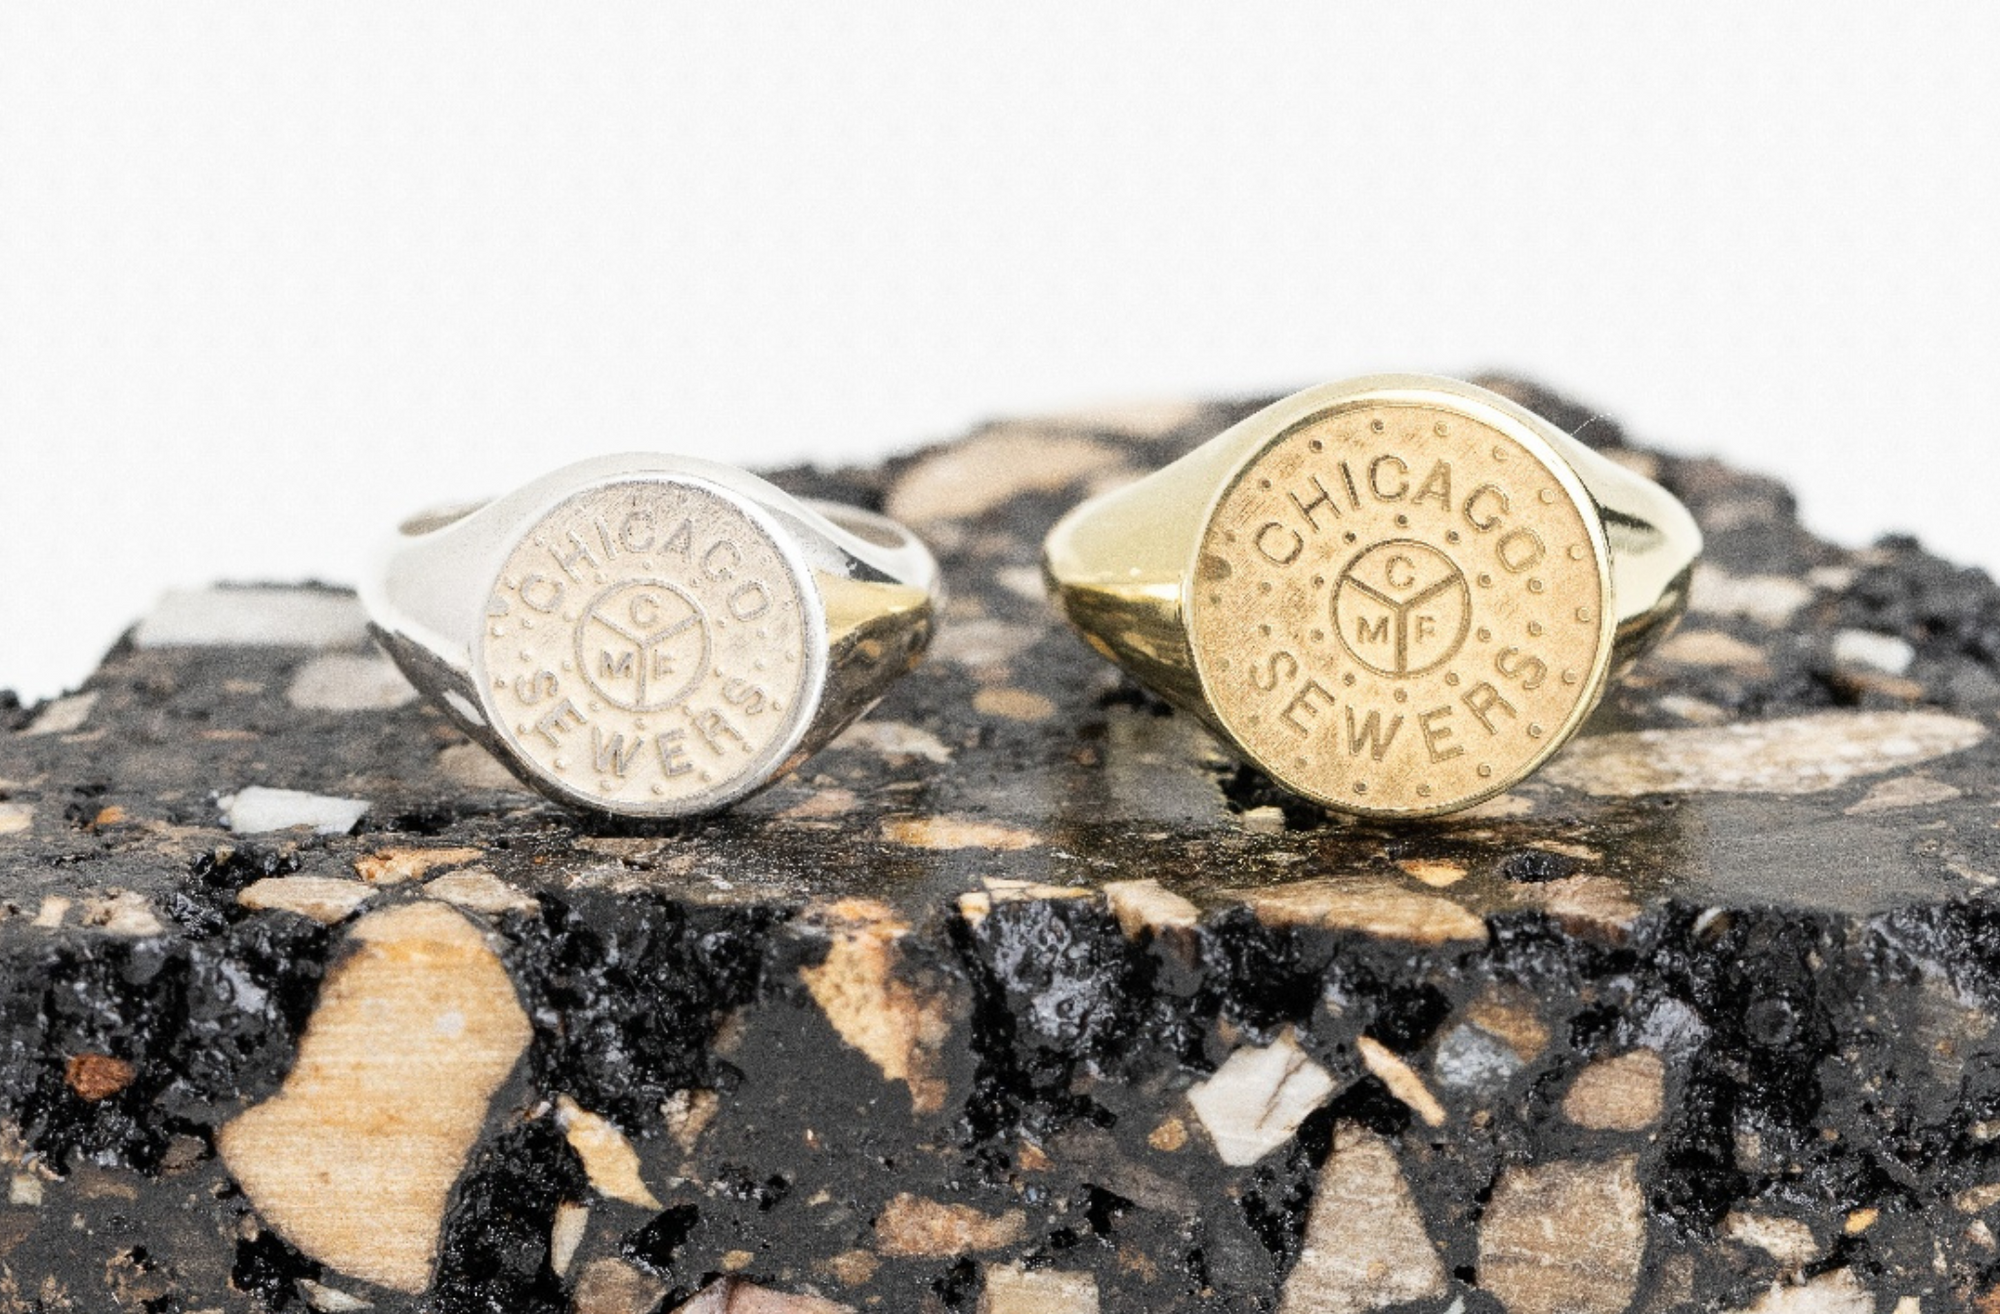 Sterling silver and 18k gold vermeil Chicago Mini Manhole rings displayed on a textured chunk of asphalt, highlighting urban-inspired jewelry design.